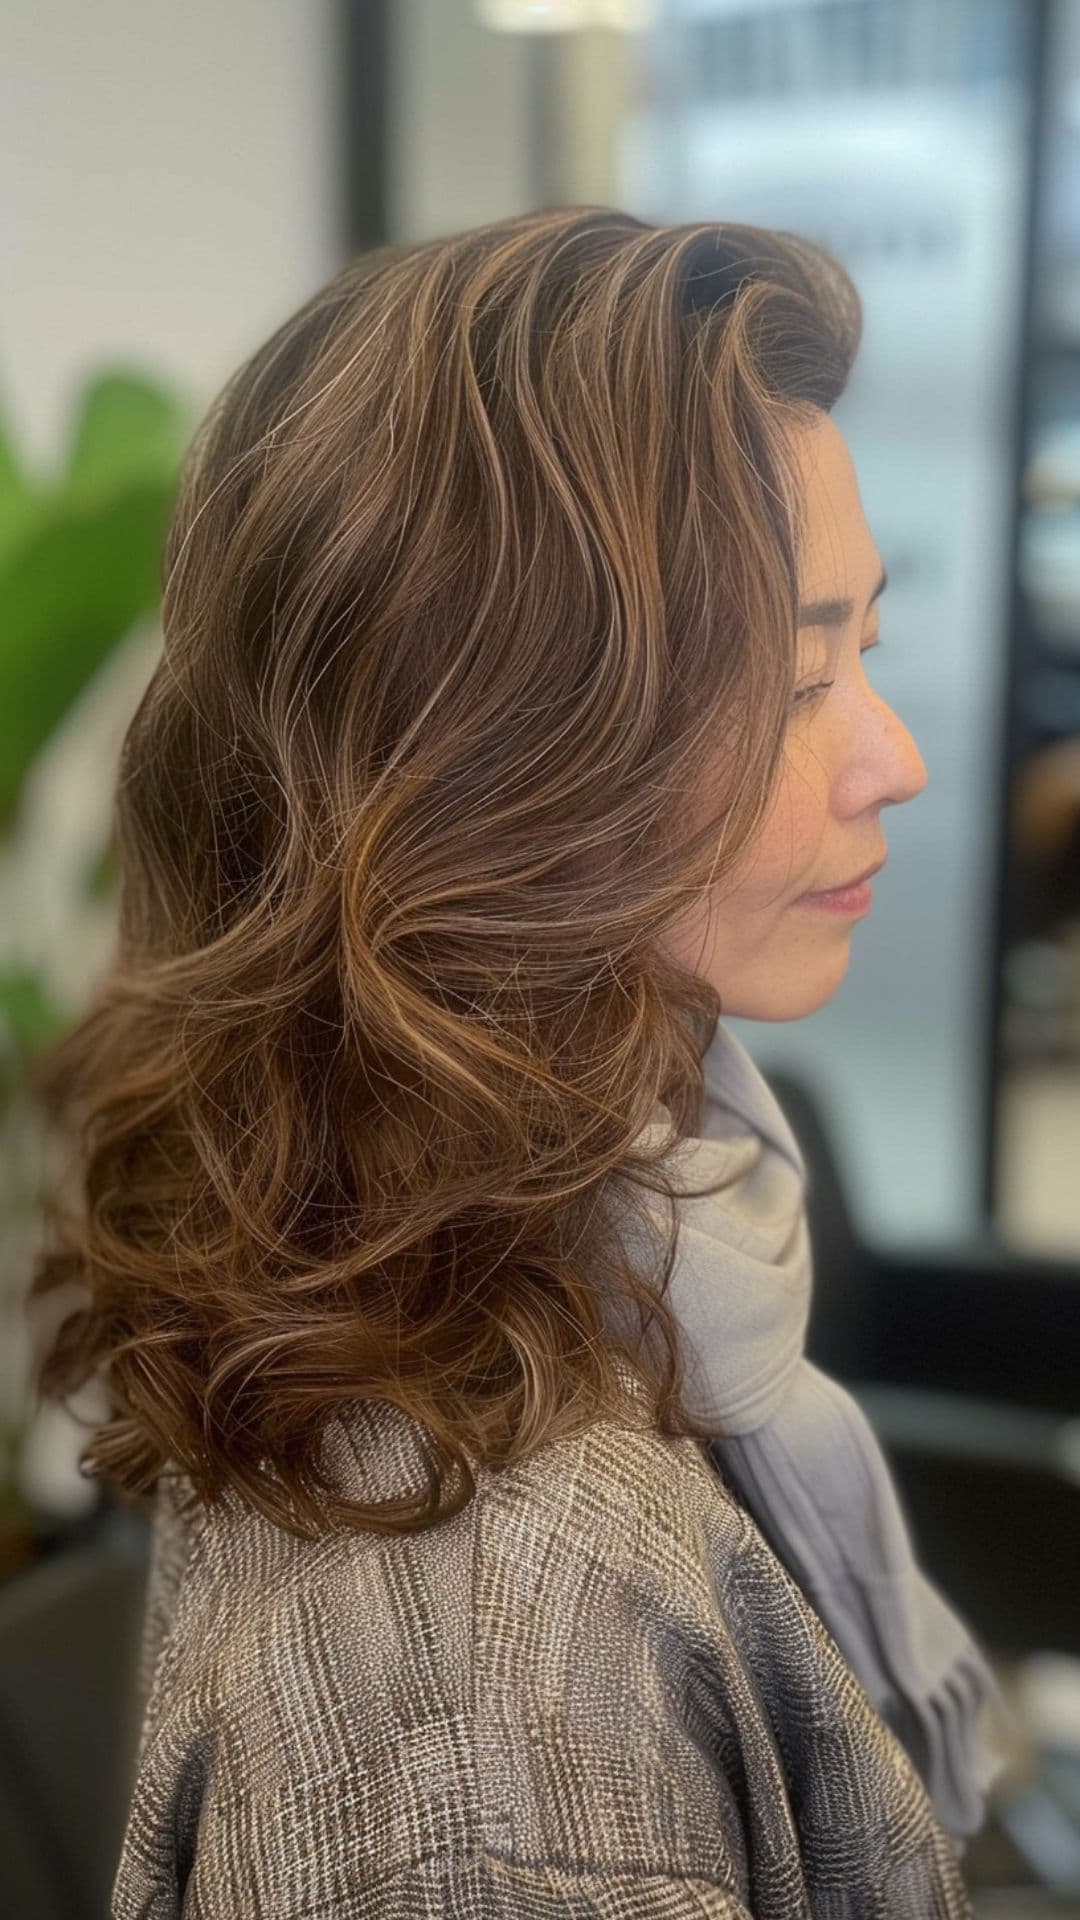 An old woman modelling a layered cut with soft waves.